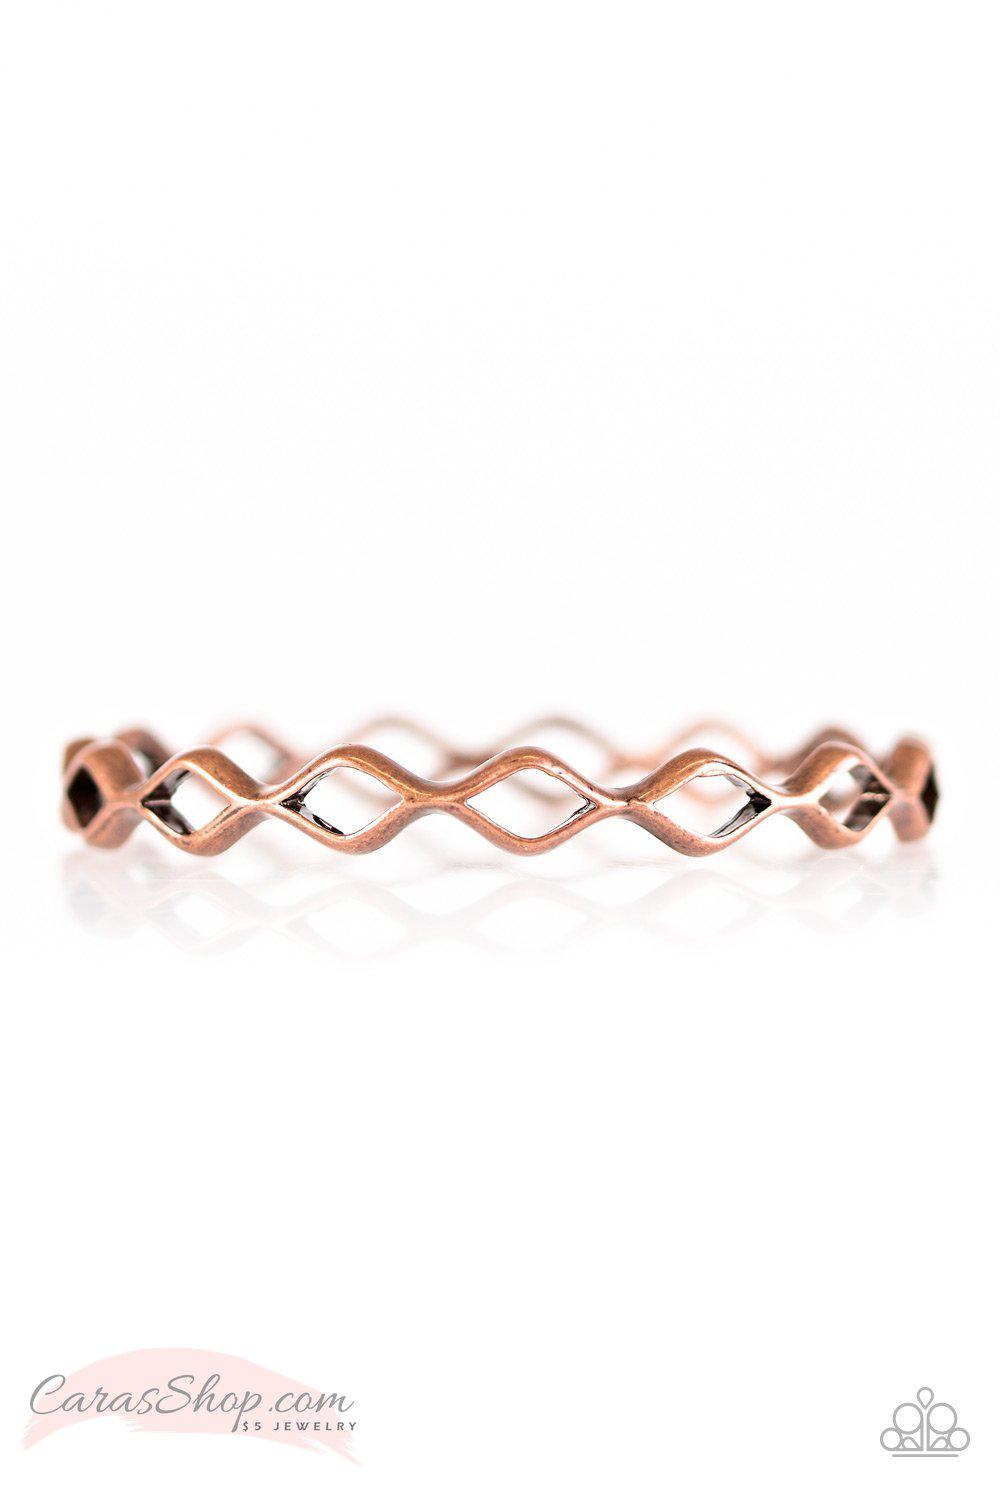 Industrial Movement Copper Bangle Bracelet - Paparazzi Accessories-CarasShop.com - $5 Jewelry by Cara Jewels